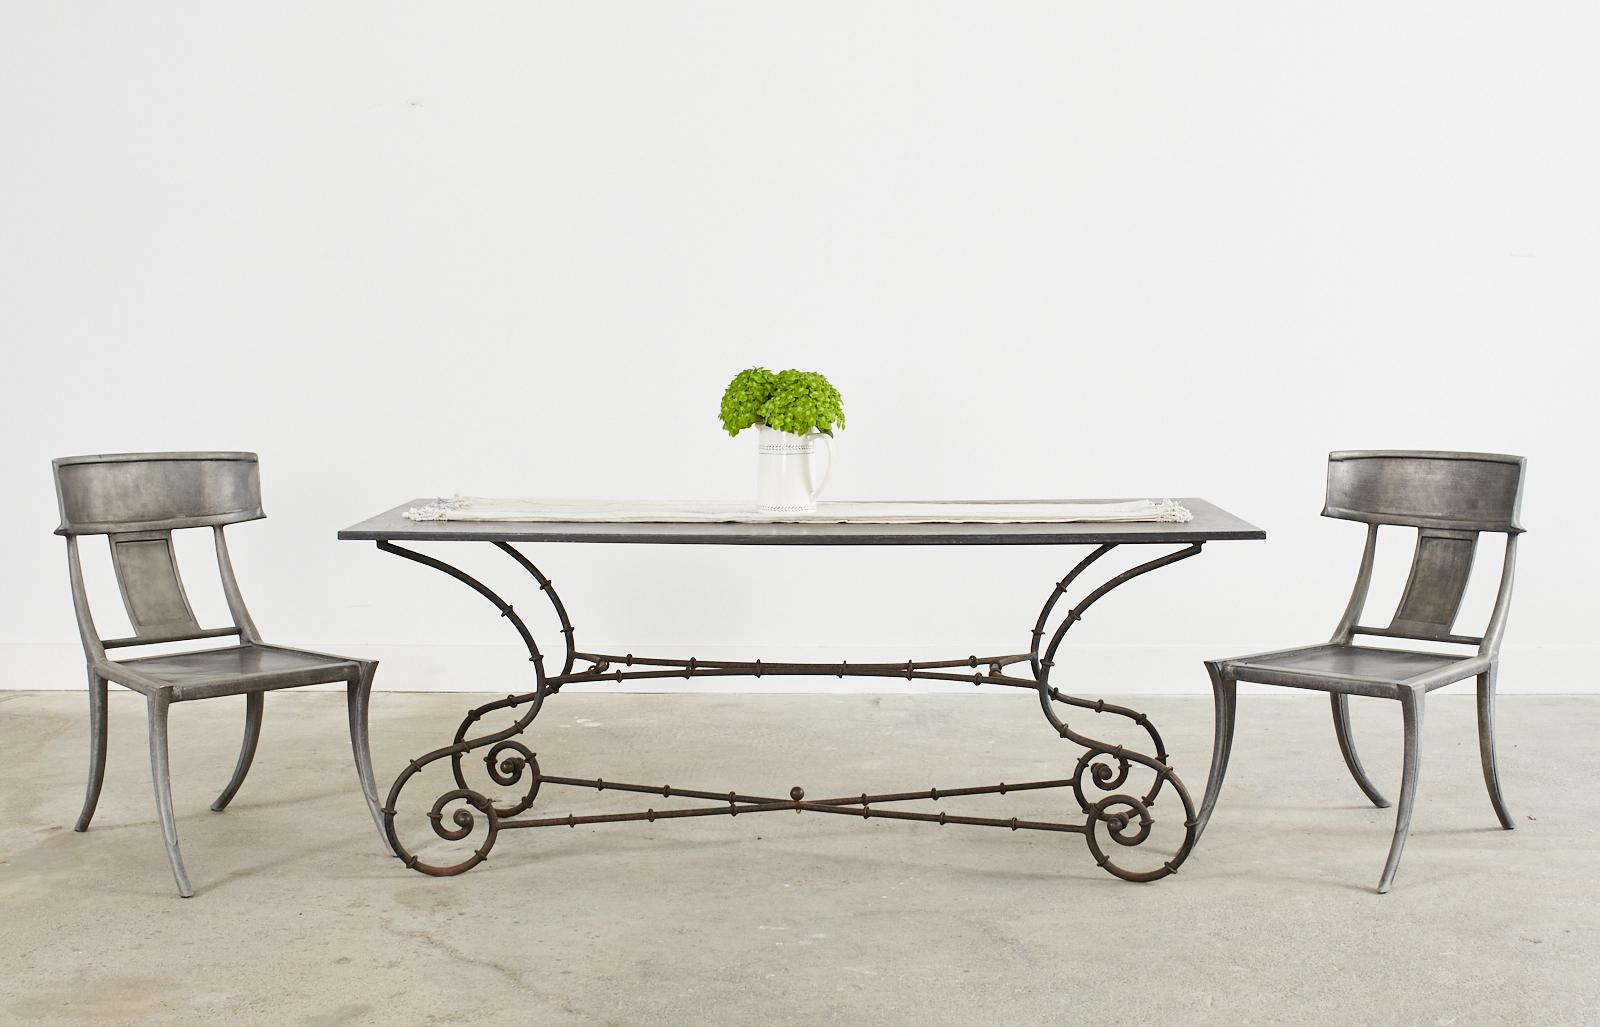 Amazing mid-century modern faux bamboo iron patio and garden dining table featuring a rare black slate top. The dramatic sinuous design is constructed from thick wrought iron having gracefully scrolled leg ends with a pair of bronze ball finials and